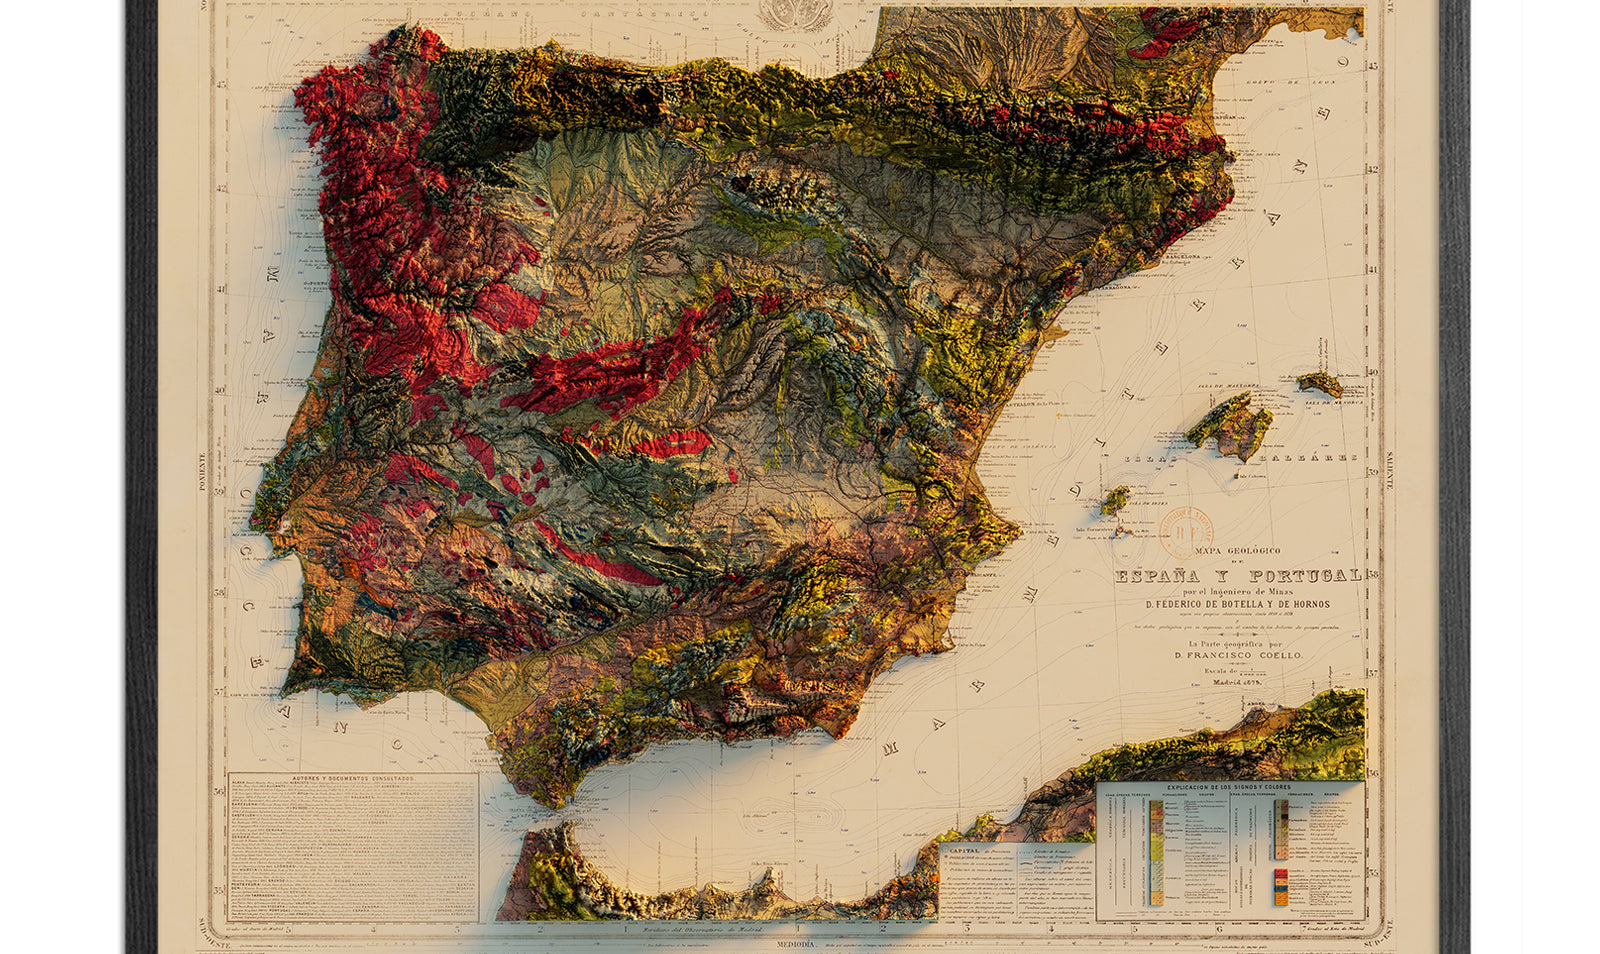 Vintage Spain and Portugal Relief Map - 1879